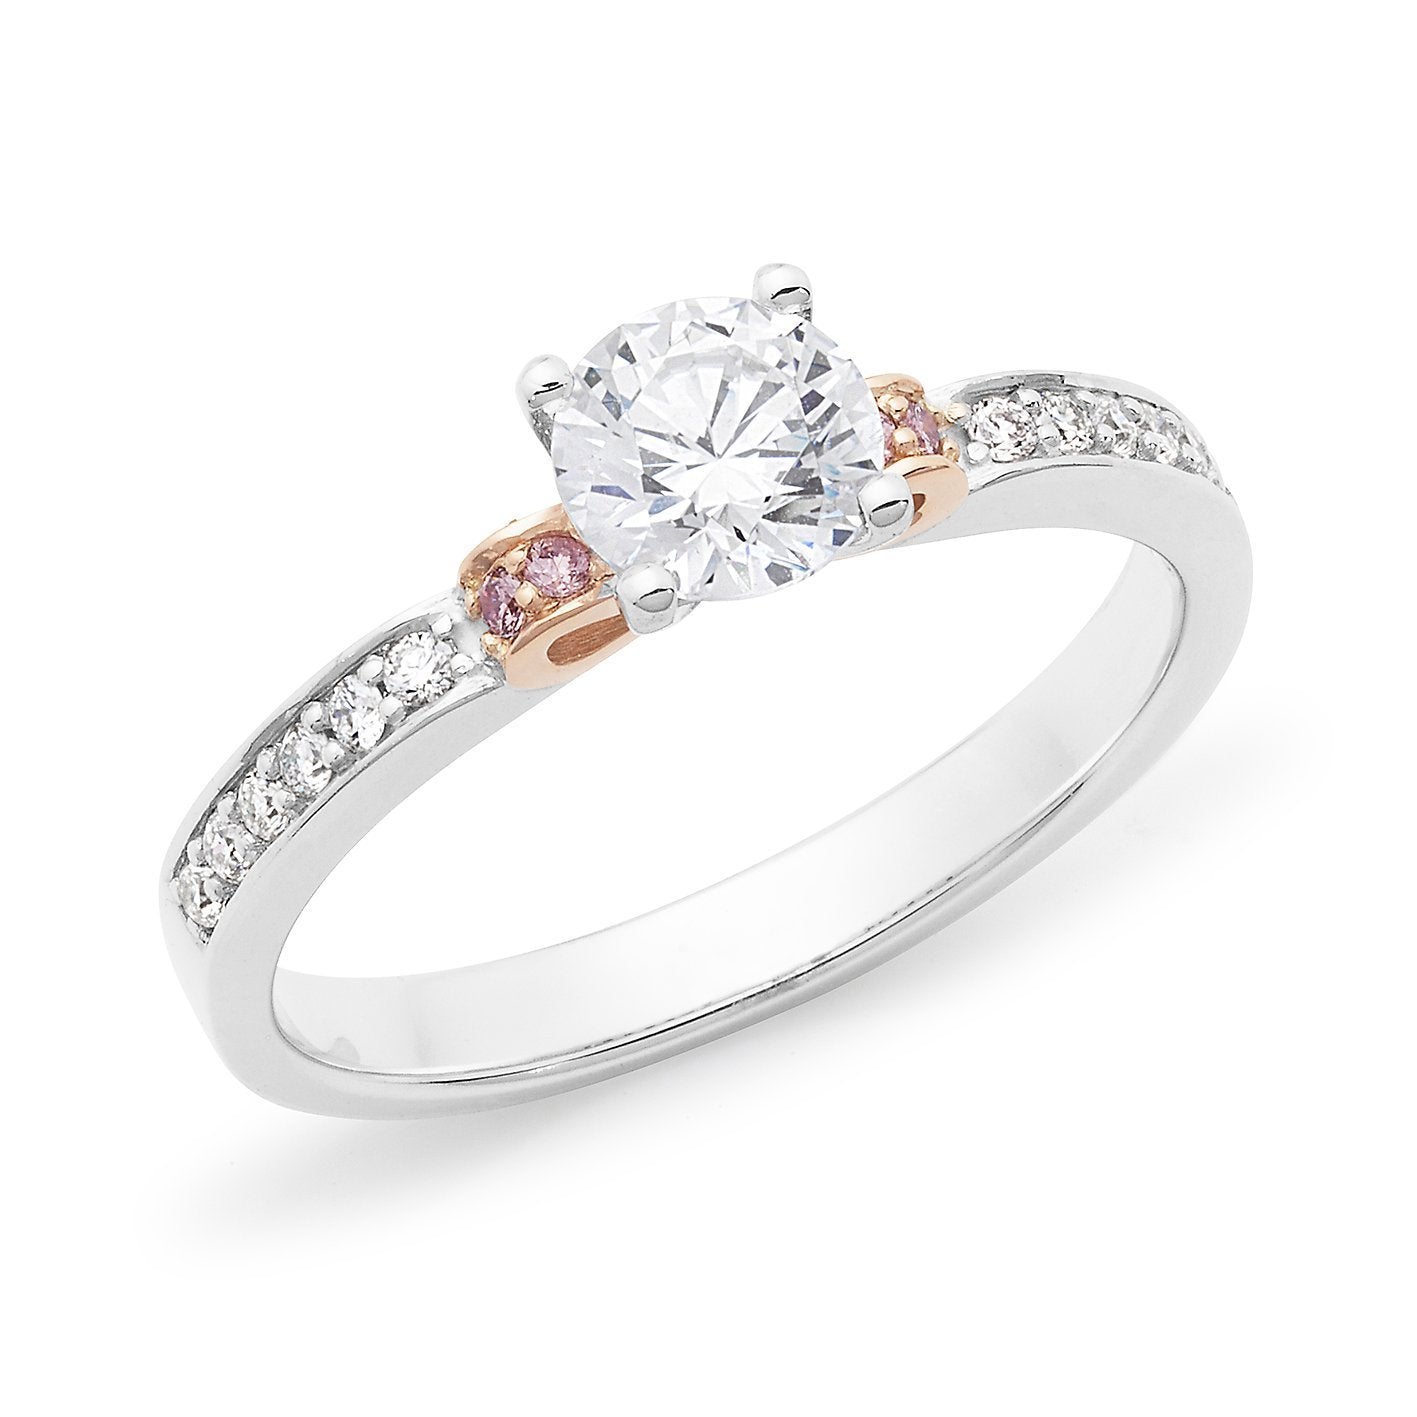 PINK CAVIAR 0.65ct White Round Brilliant & Pink Diamond Engagement Ring in 18ct White Gold